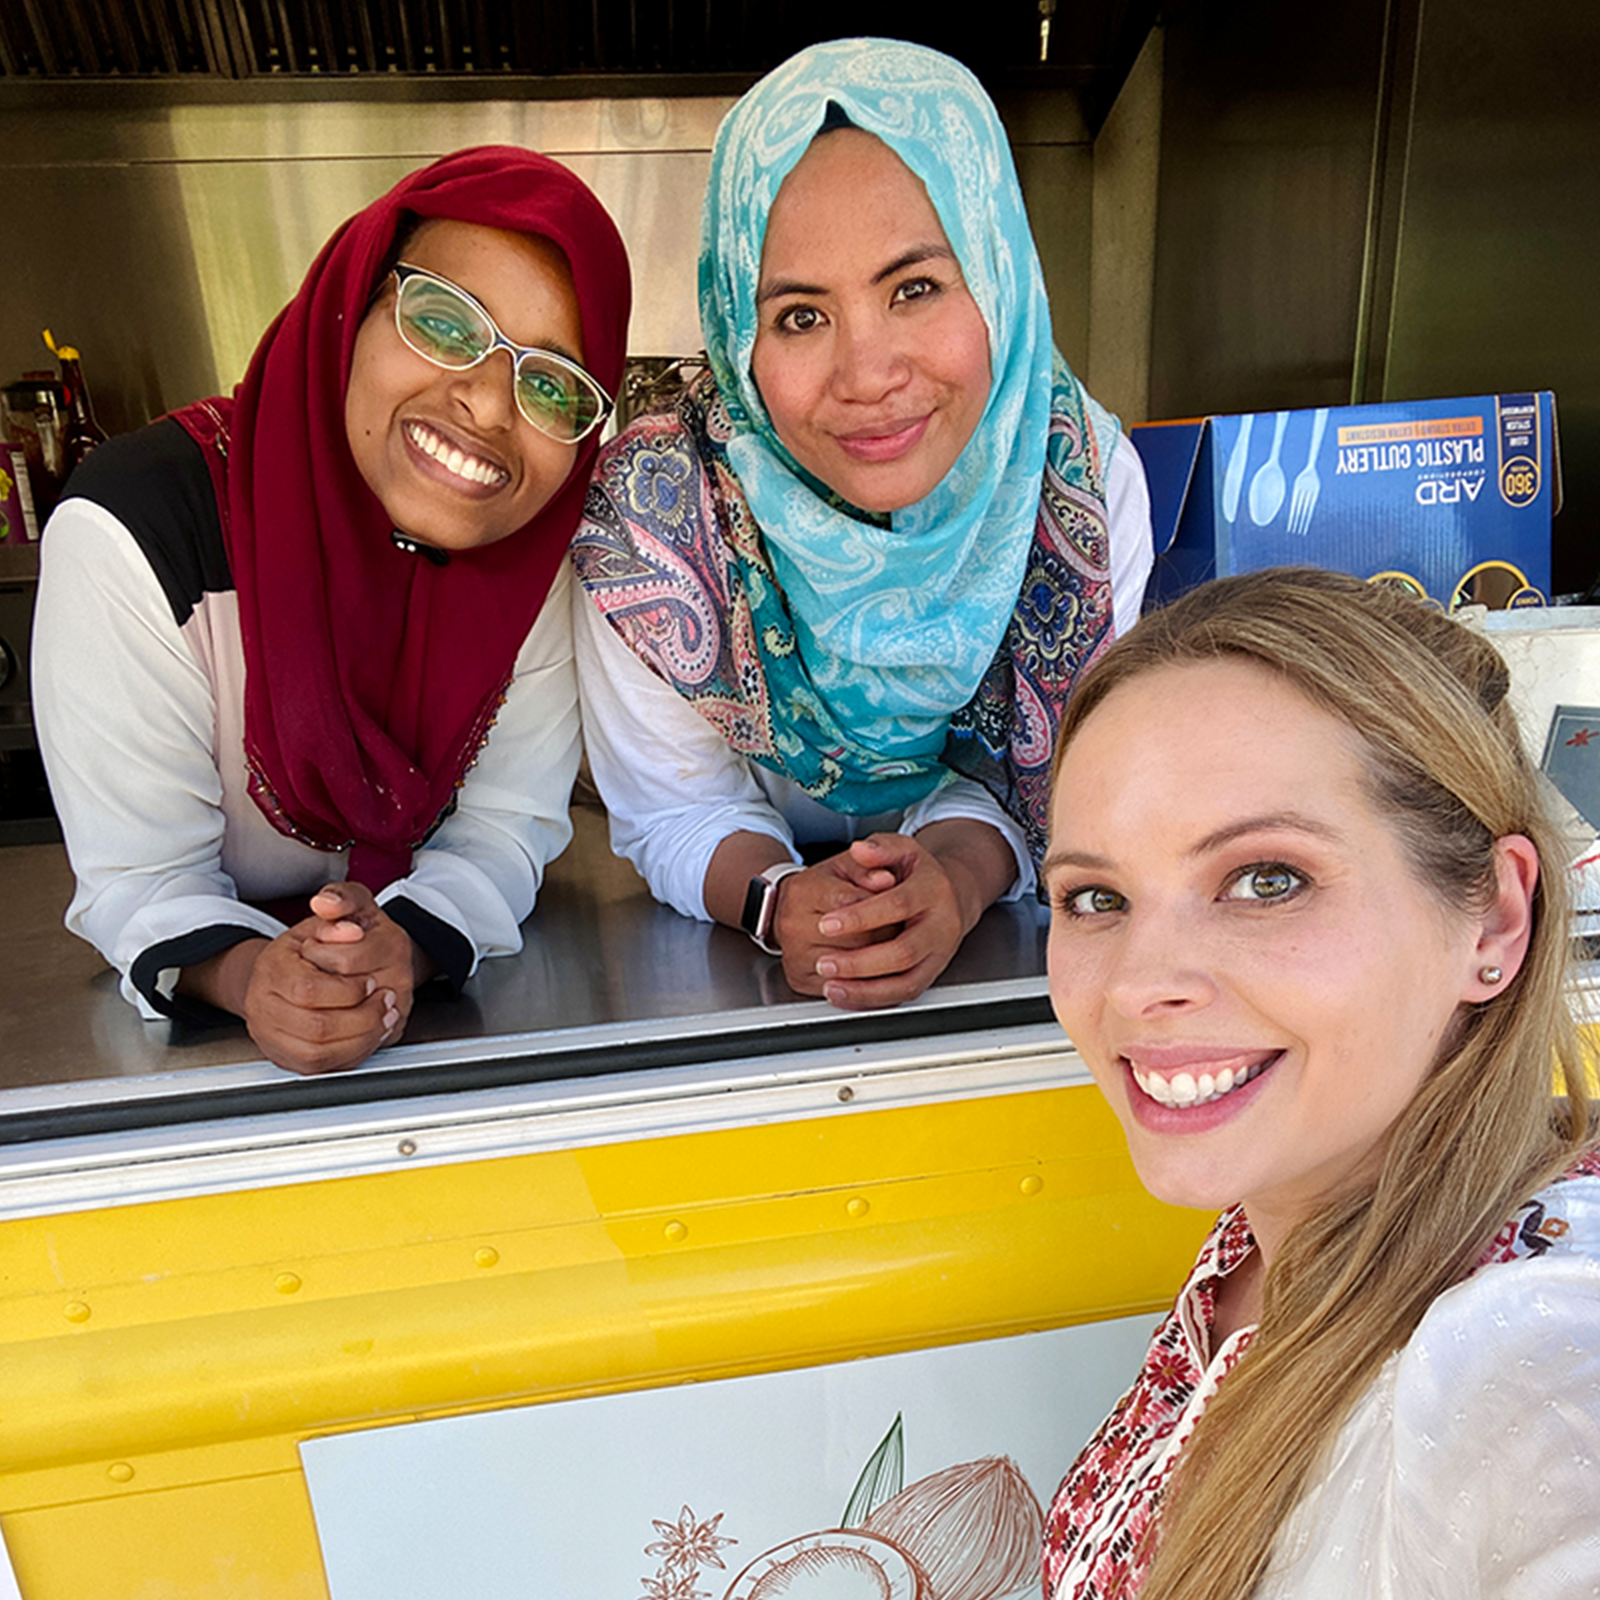 Three woman smiling for a photo, two working in a food truck, one on the outside taking the photo.